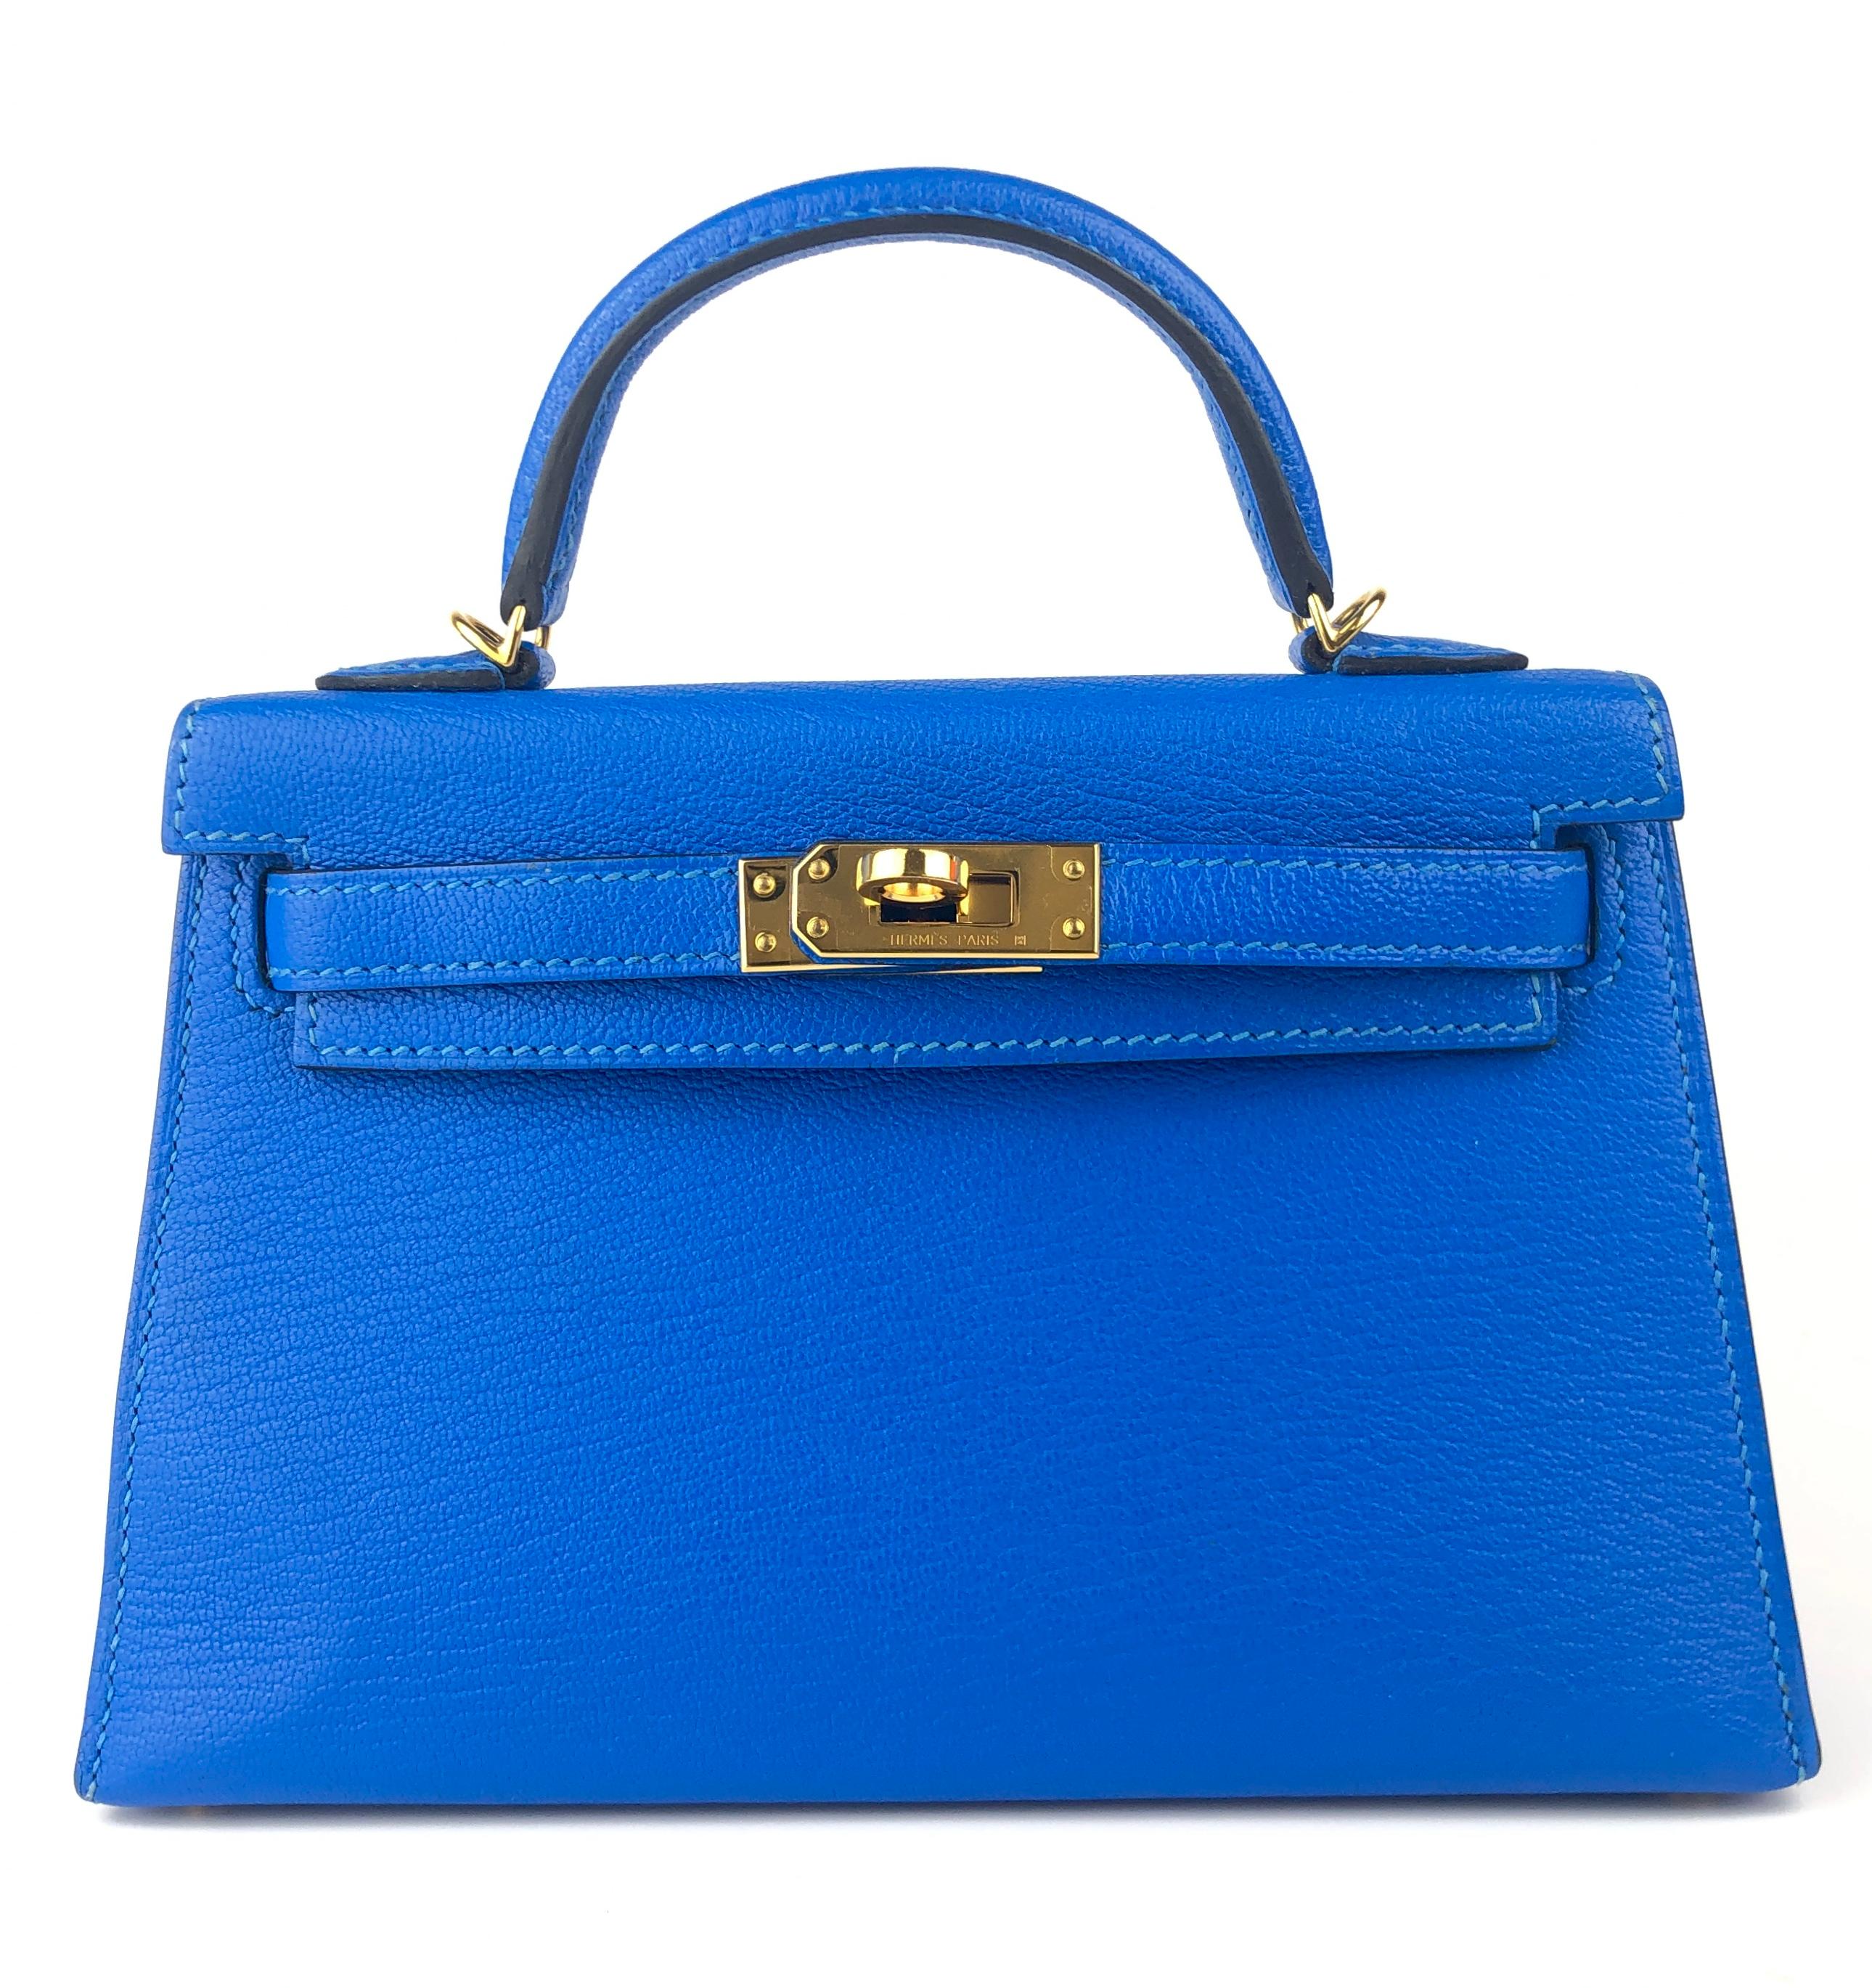 Rare and Hardest to get Hermes Mini Kelly 20 Blue Hydra Chèvre Leather Complimented by Gold Hardware. A Stamp 2017. Excellent Condition with Plastic on Hardware.

Please keep in mind that this is a pre owned item, the bag has been carried before,